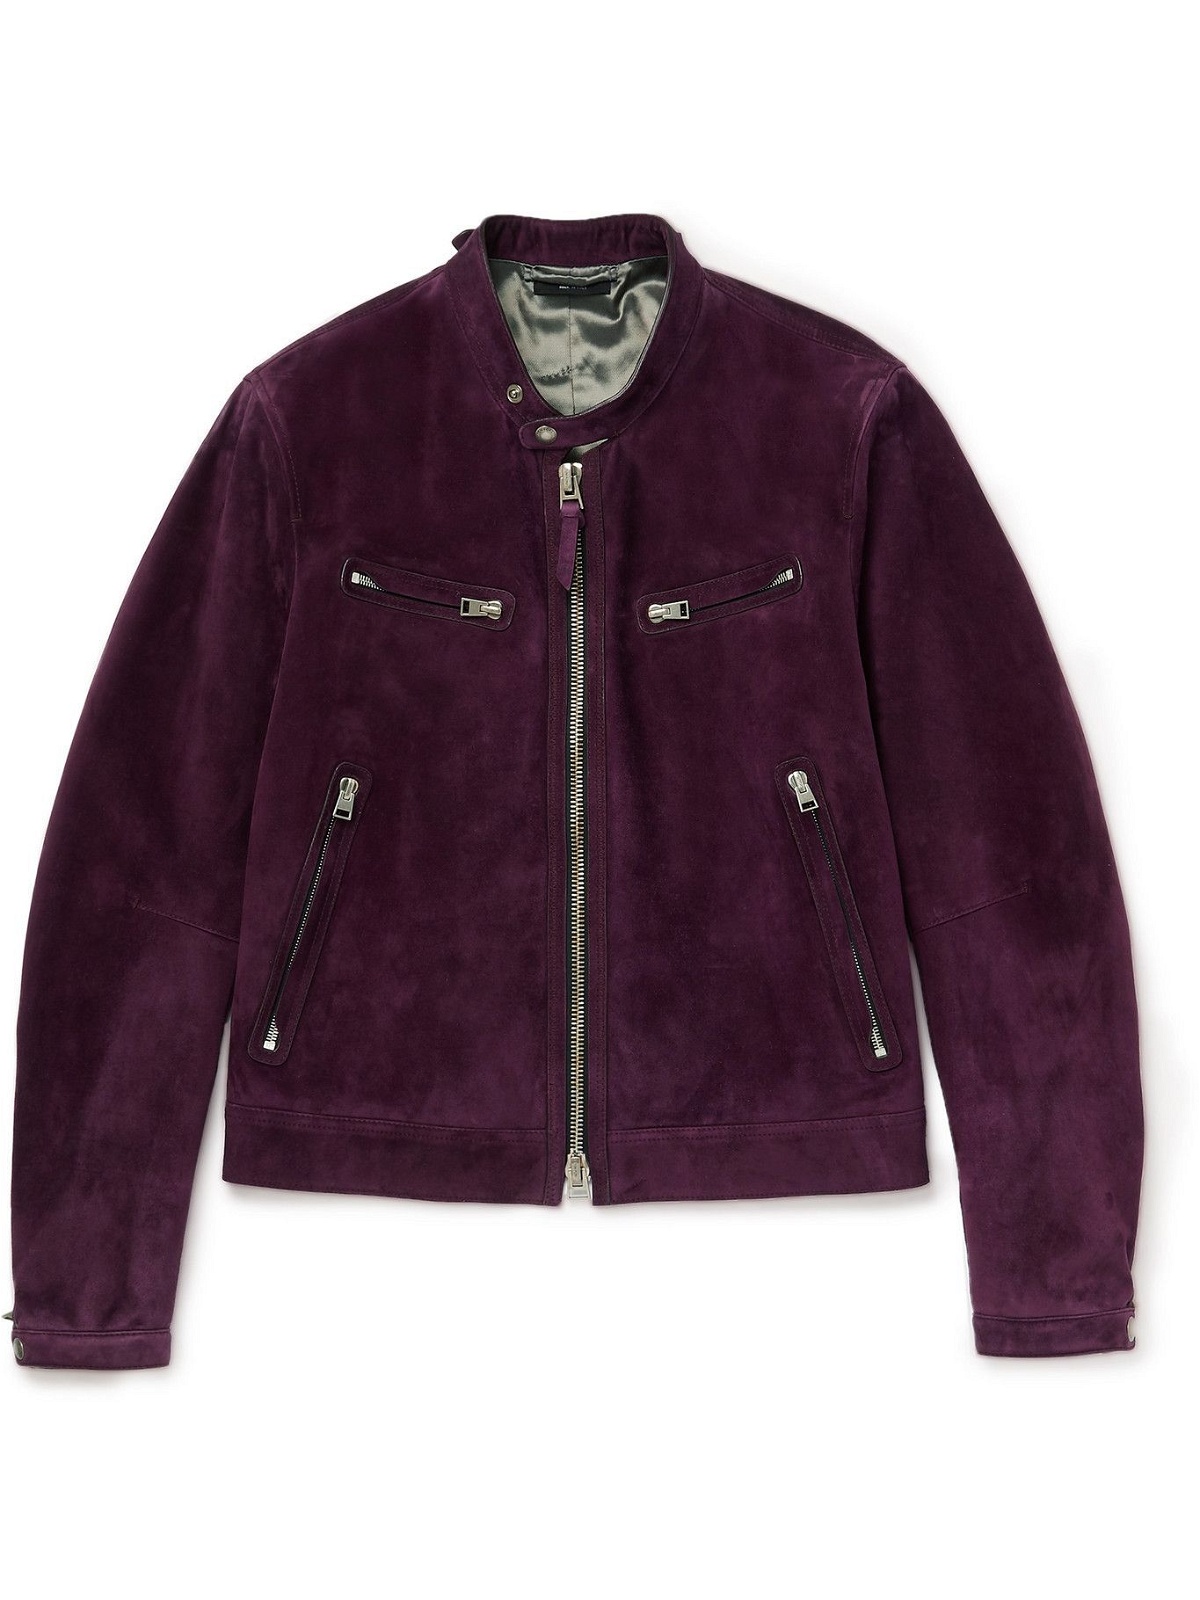 TOM FORD - Suede Blouson Jacket - Purple TOM FORD